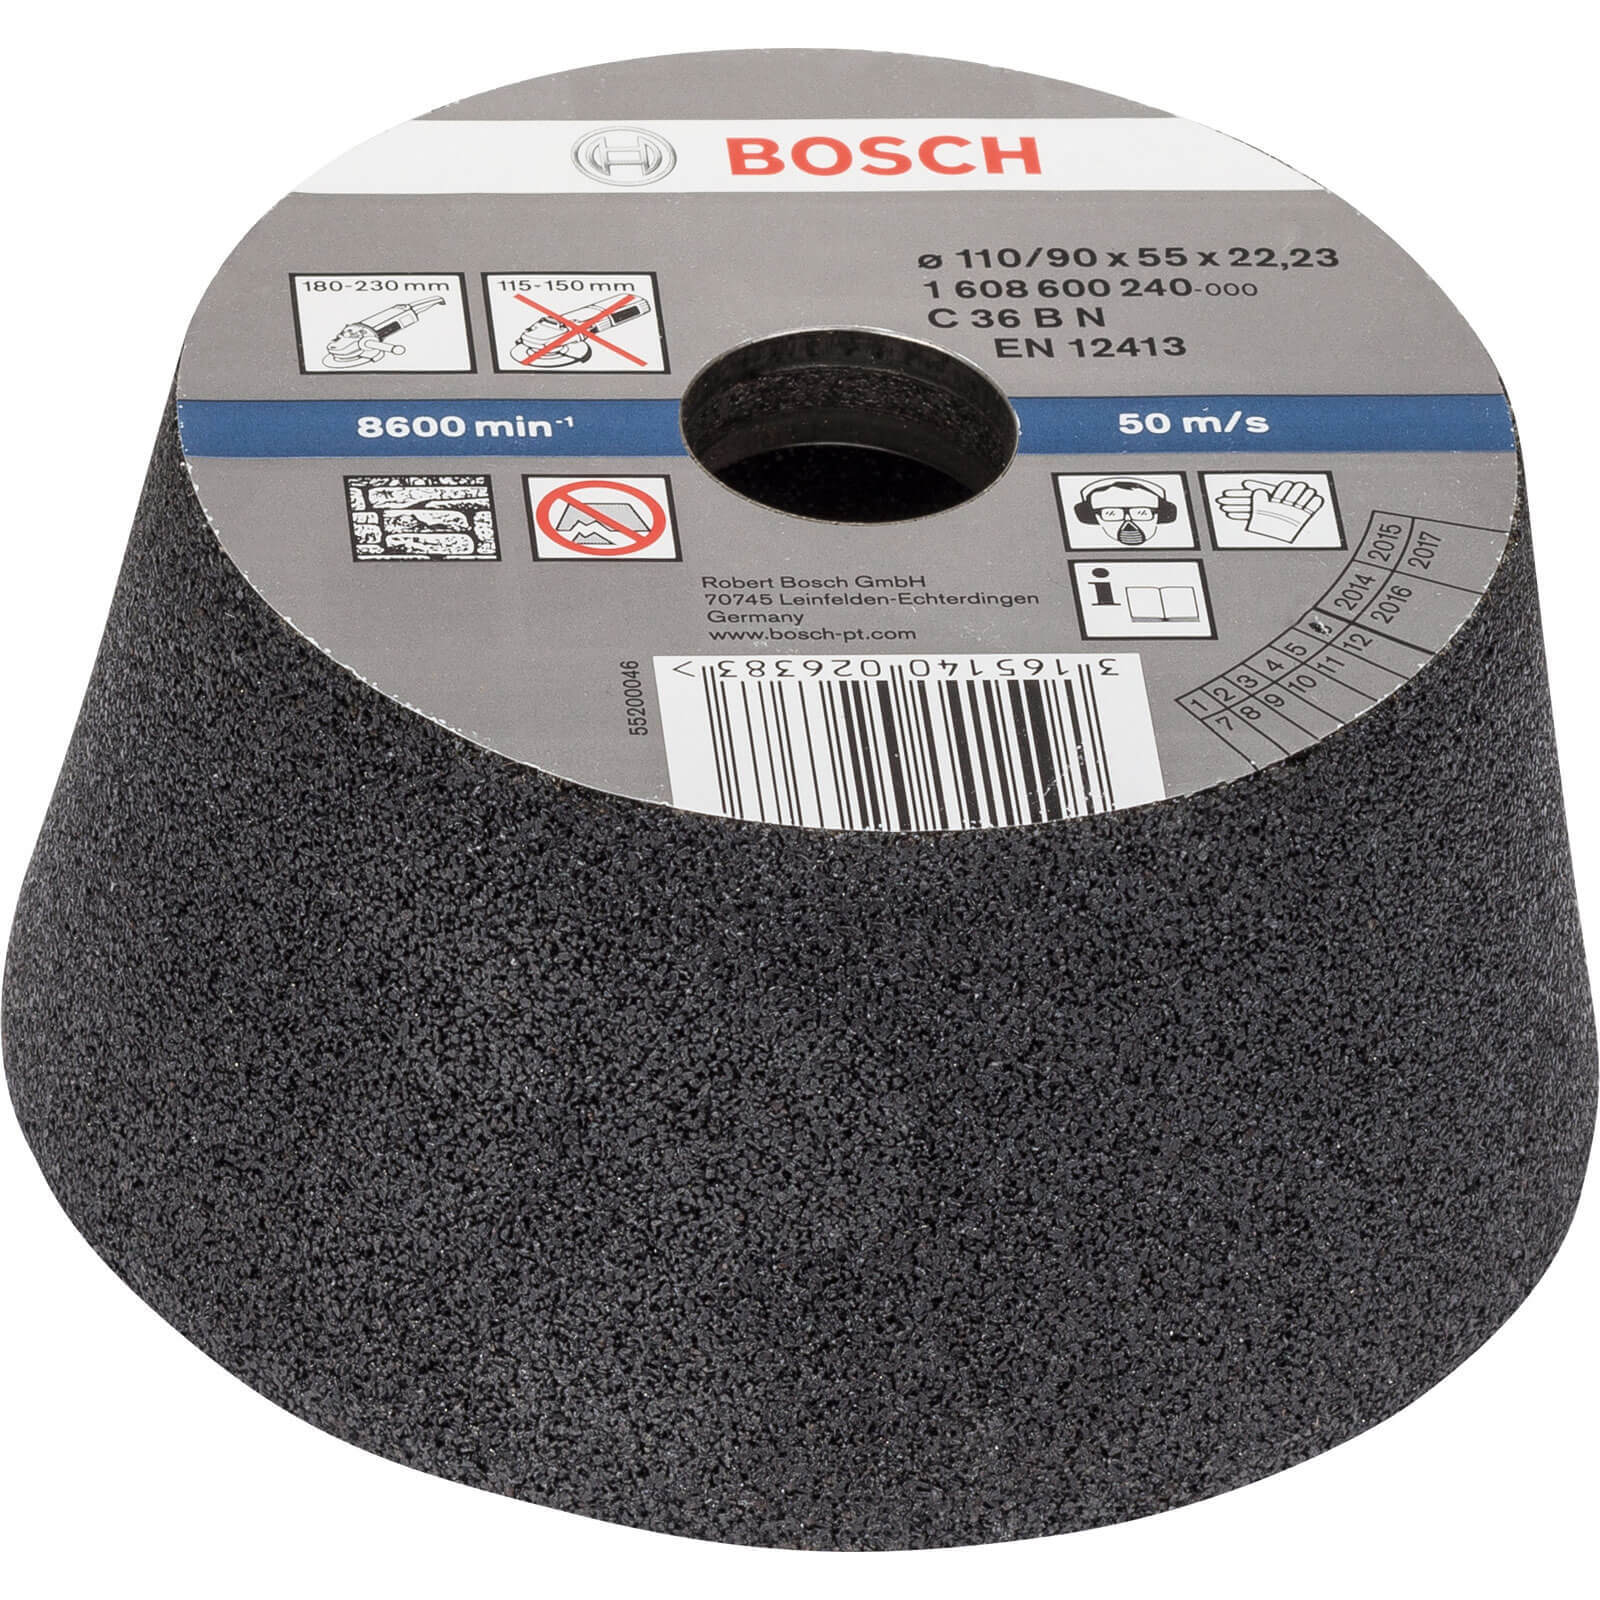 Image of Bosch Conical Abrasive Cup Wheel For Stone 110mm 36g